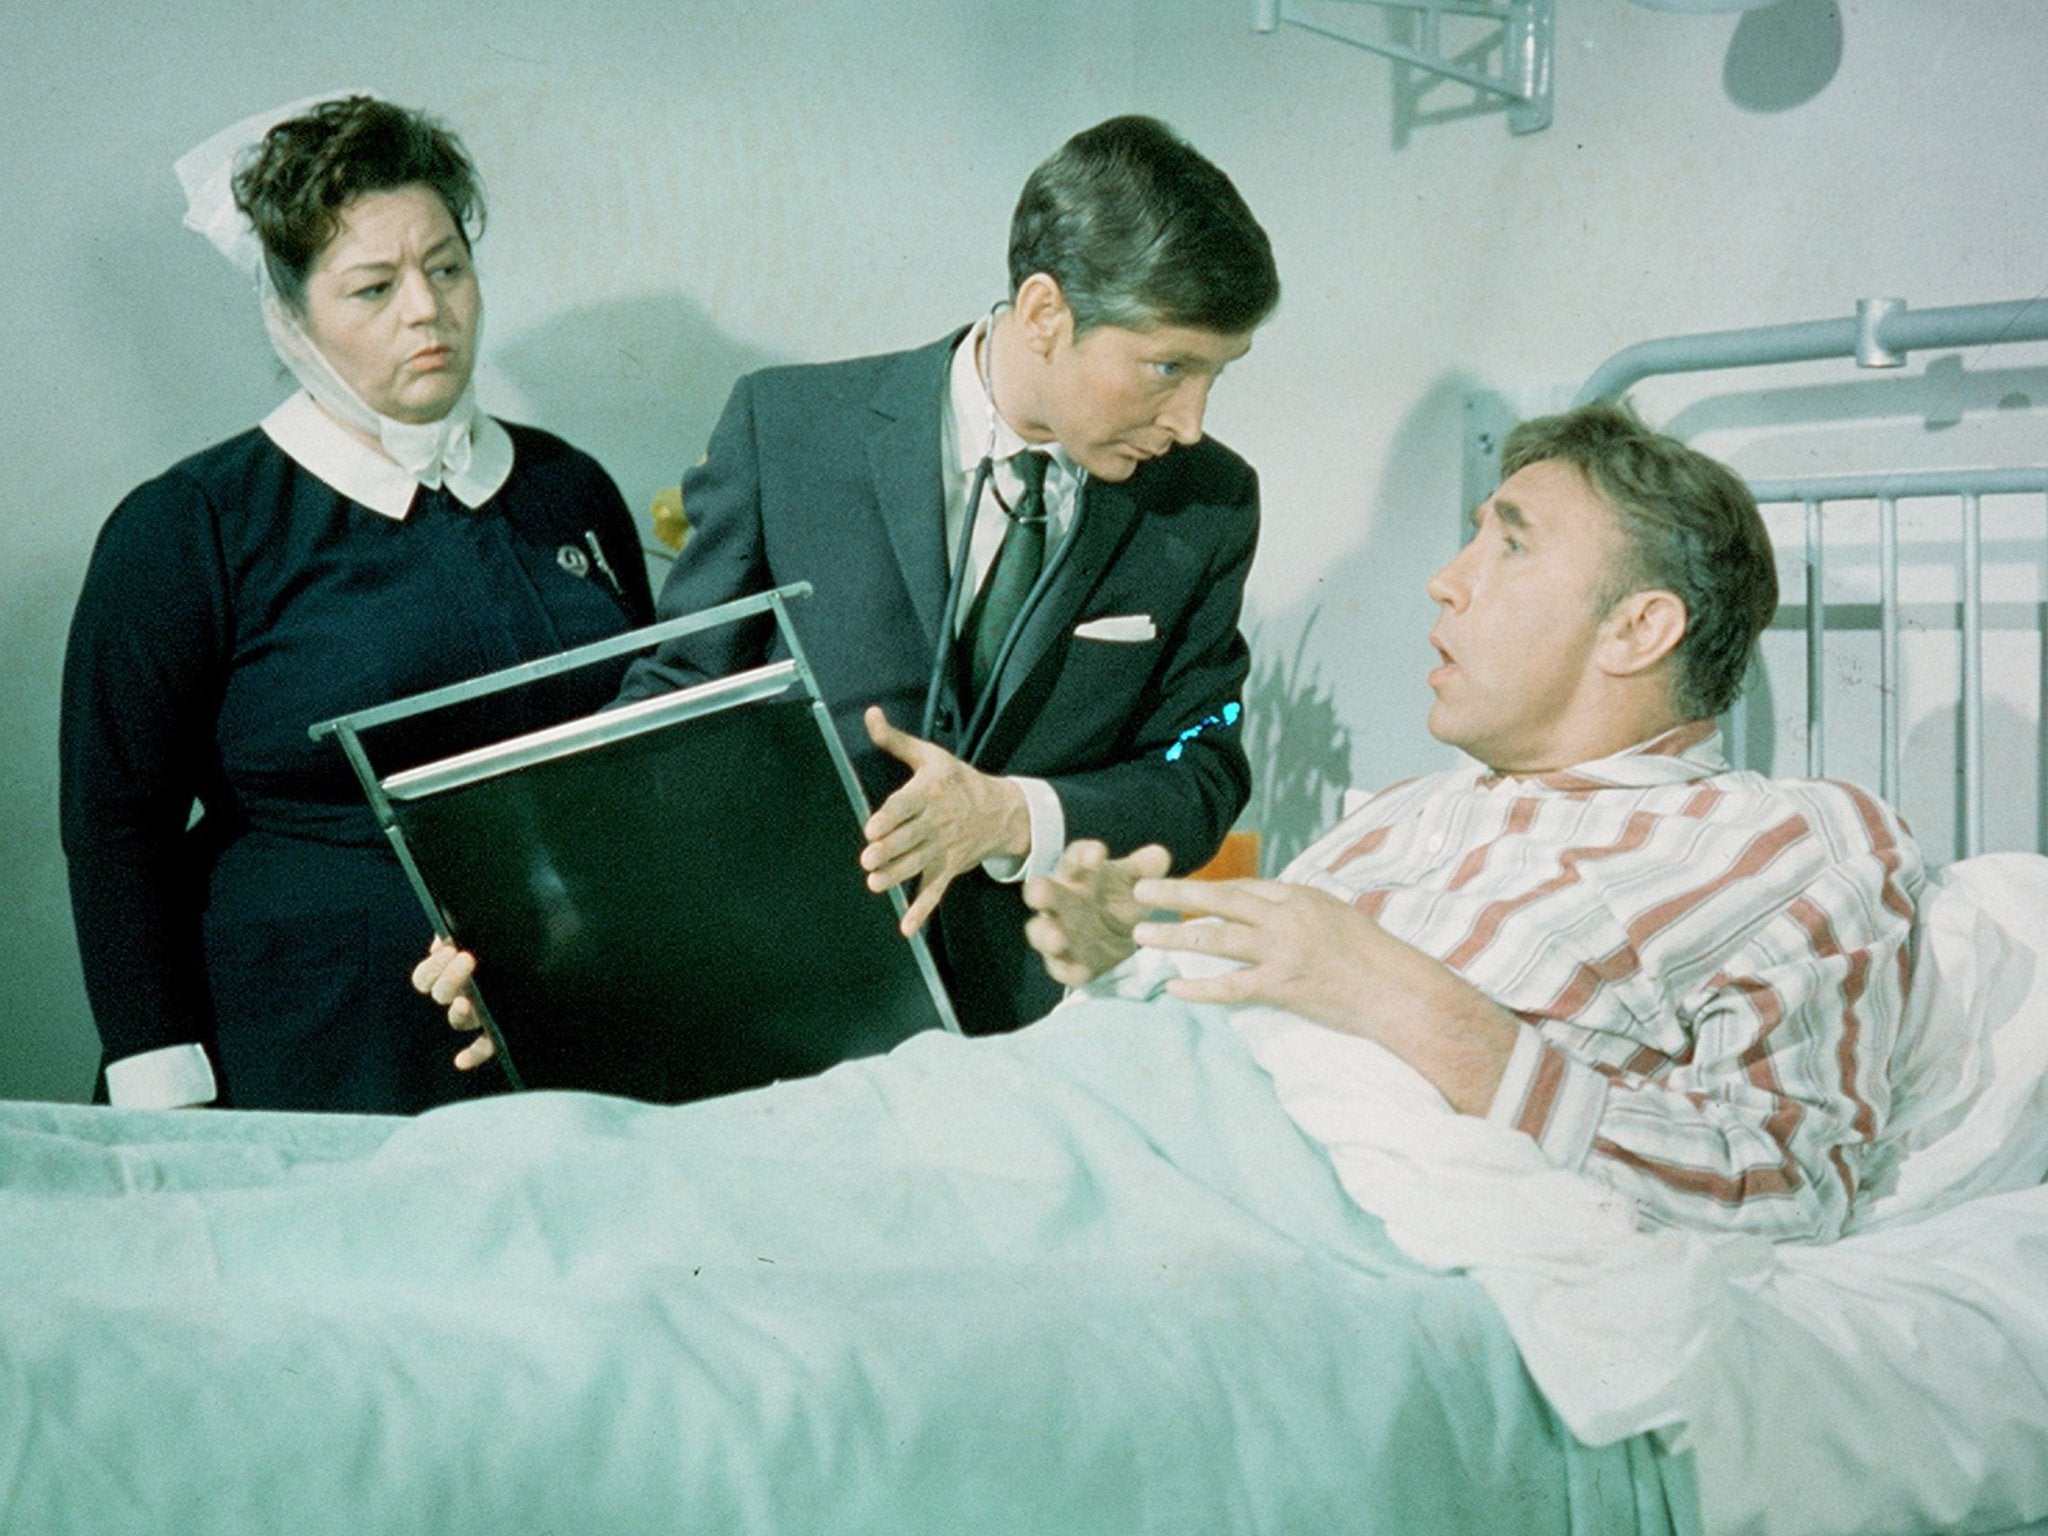 Critics on social media said the archaic claims more closely resembled the 1960s film 'Carry On Doctor'